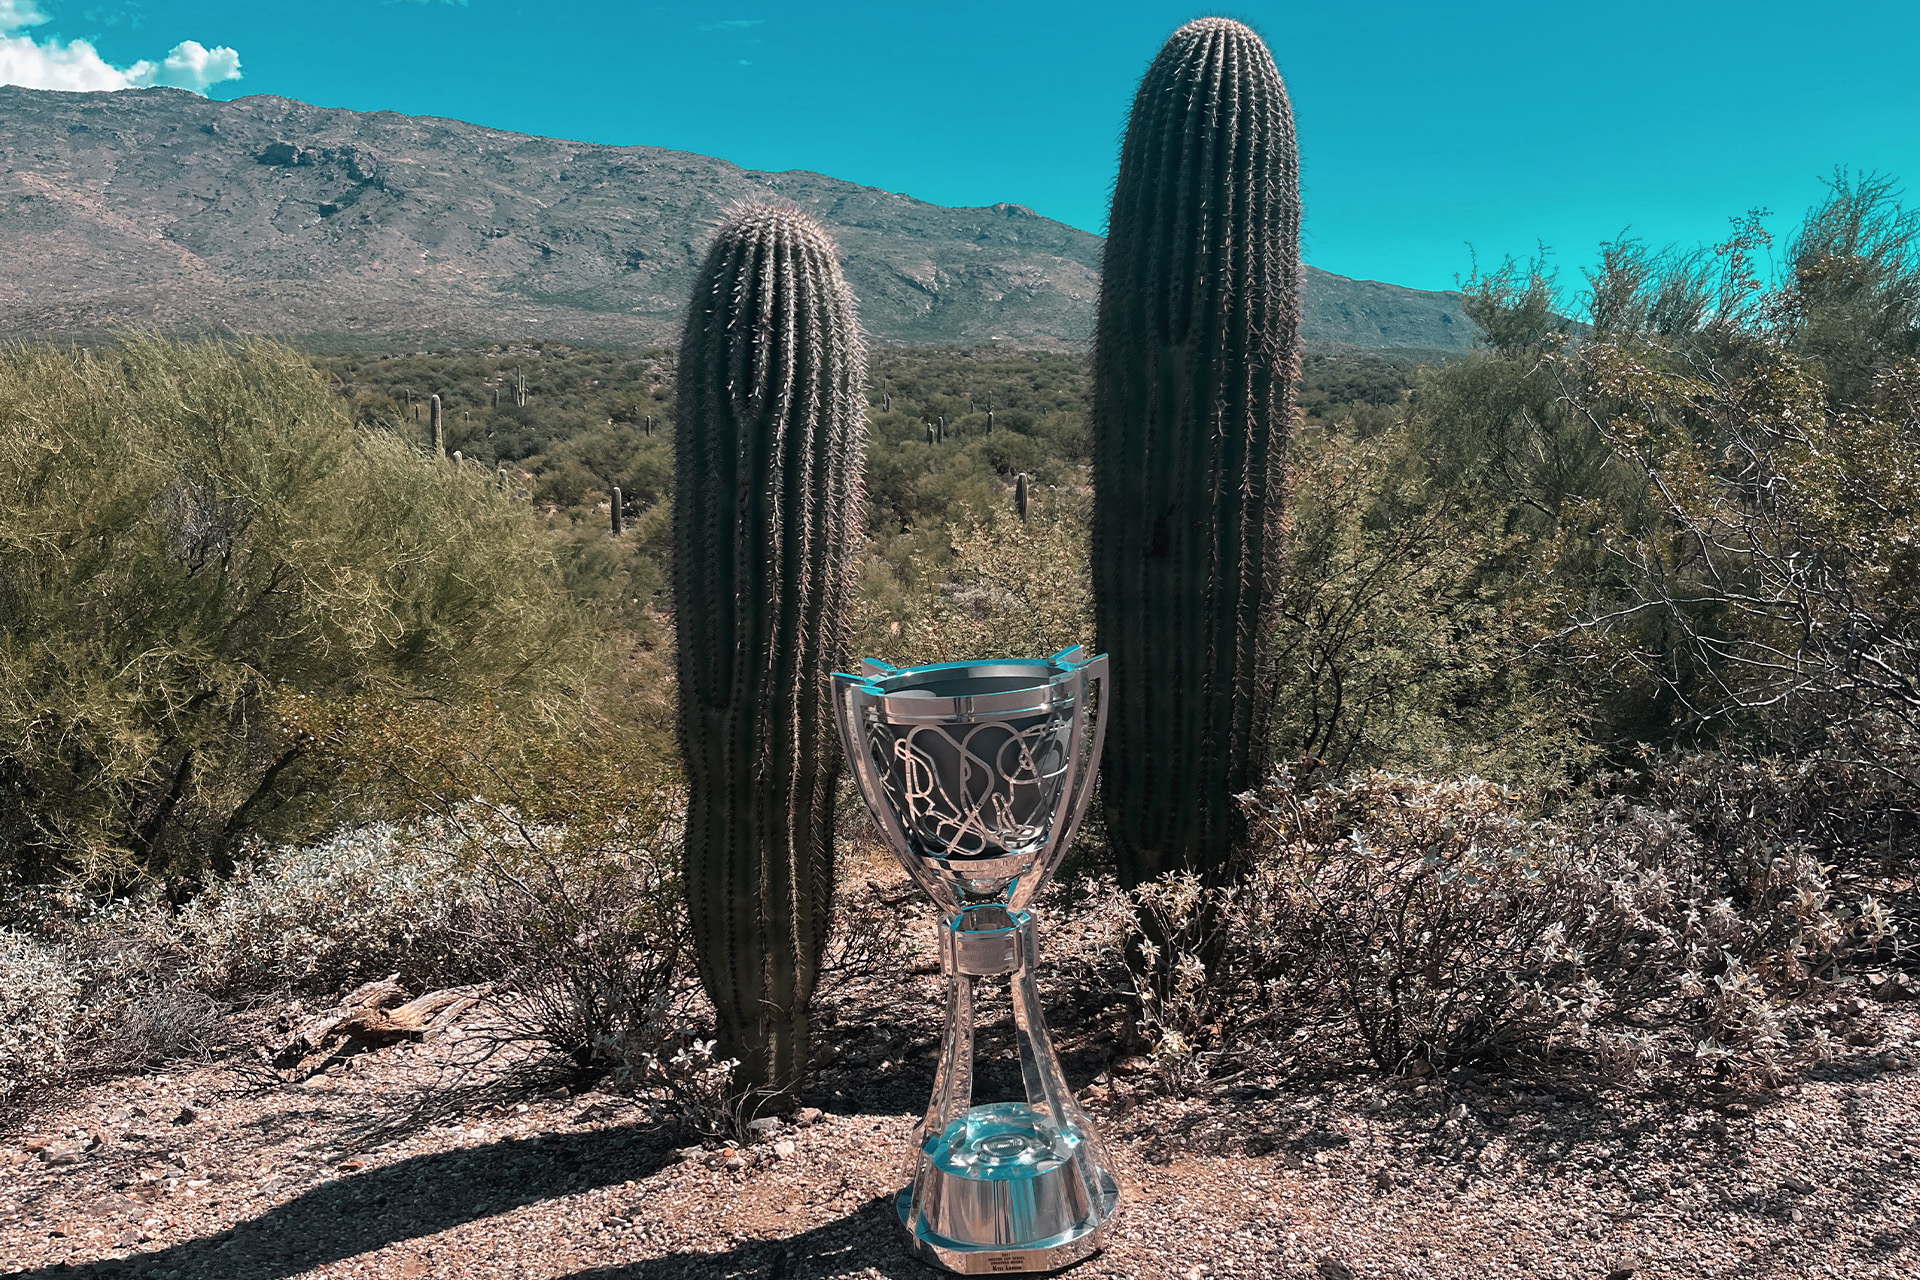 The Bill France Cup in the desert of the Saguaro National Park in front of two cacti